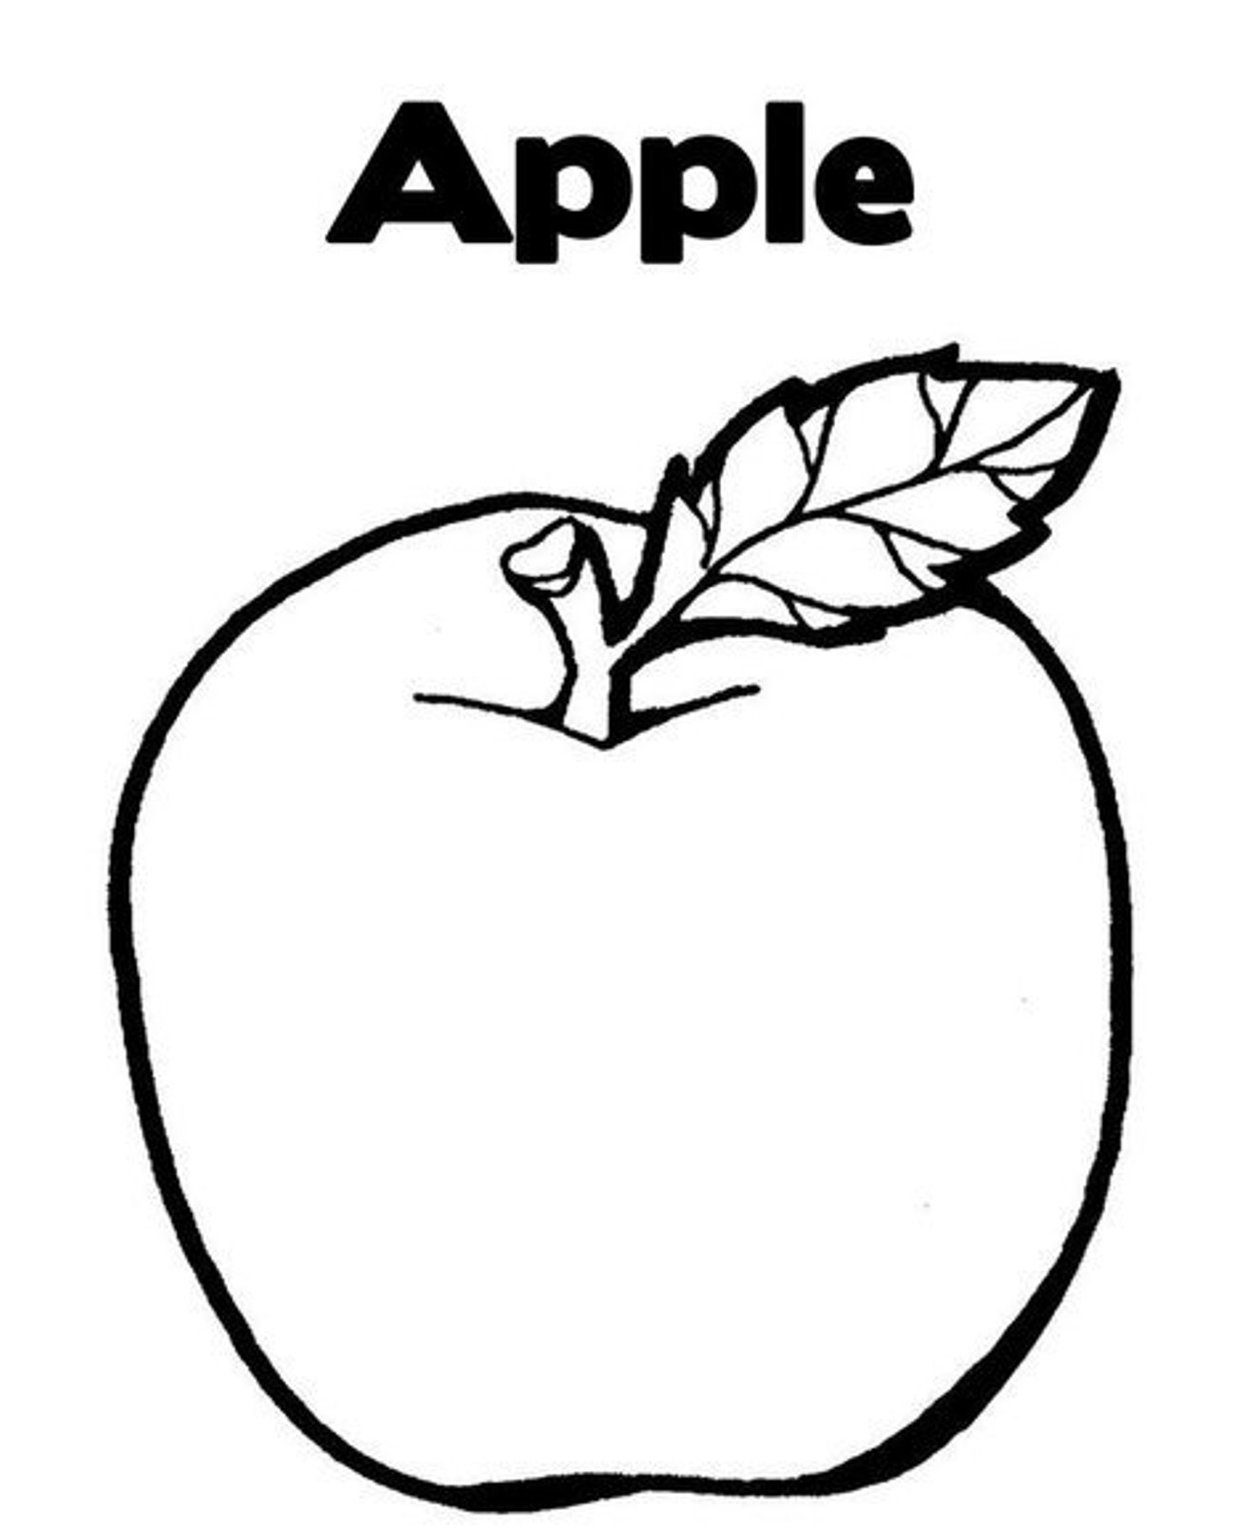 Pix For > Apple Fruit Drawing Kids Clipart - Free to use Clip Art ...